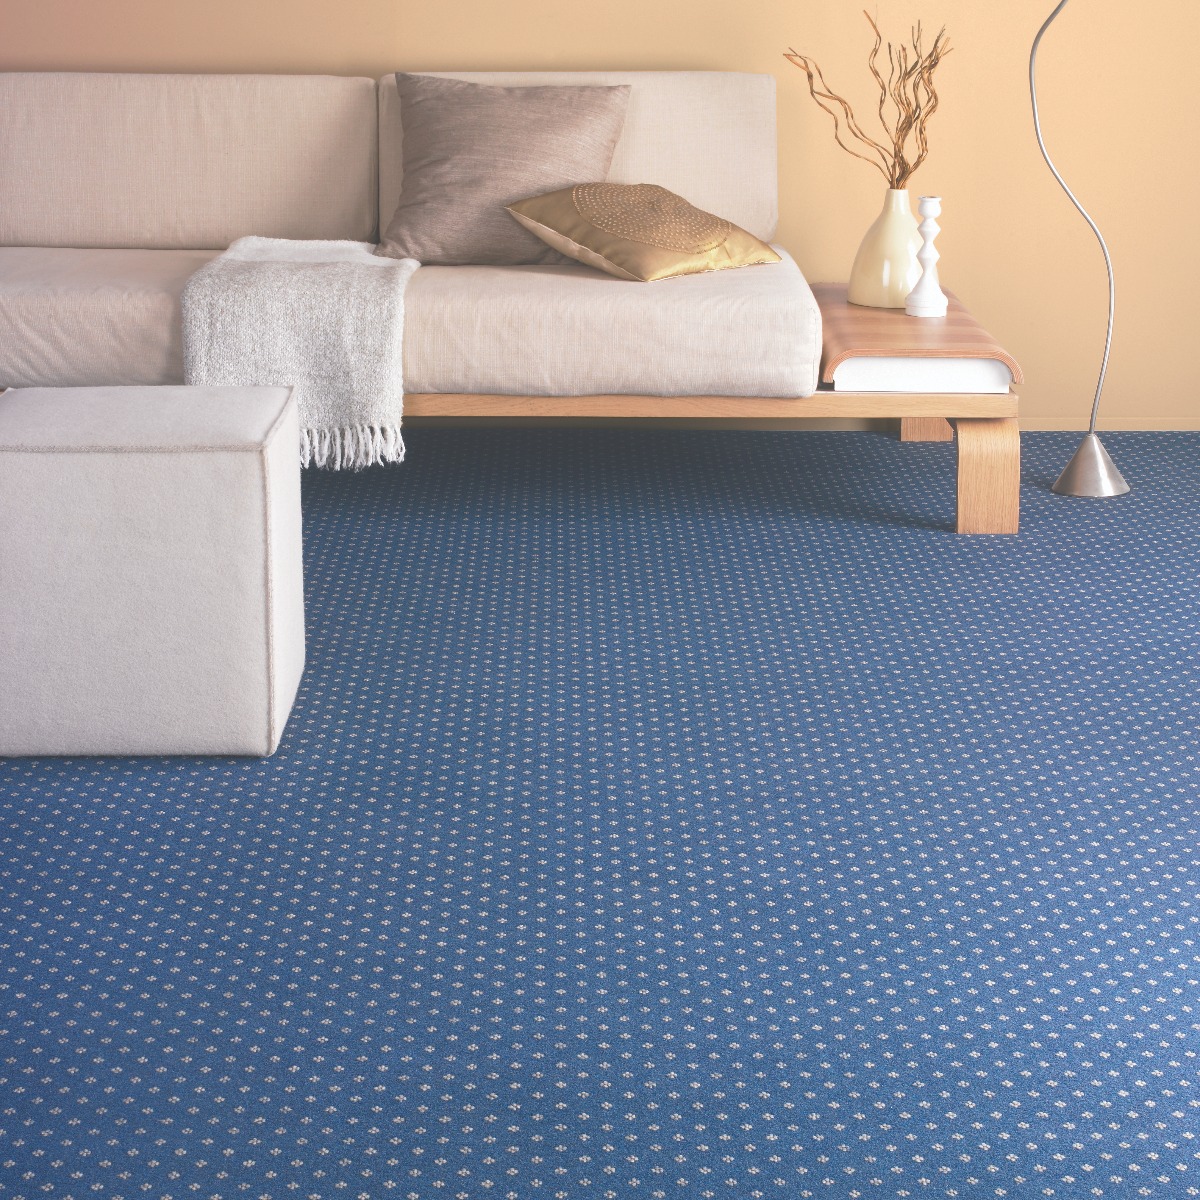 How To Choose And Match That Blue Carpet You've Always Wanted